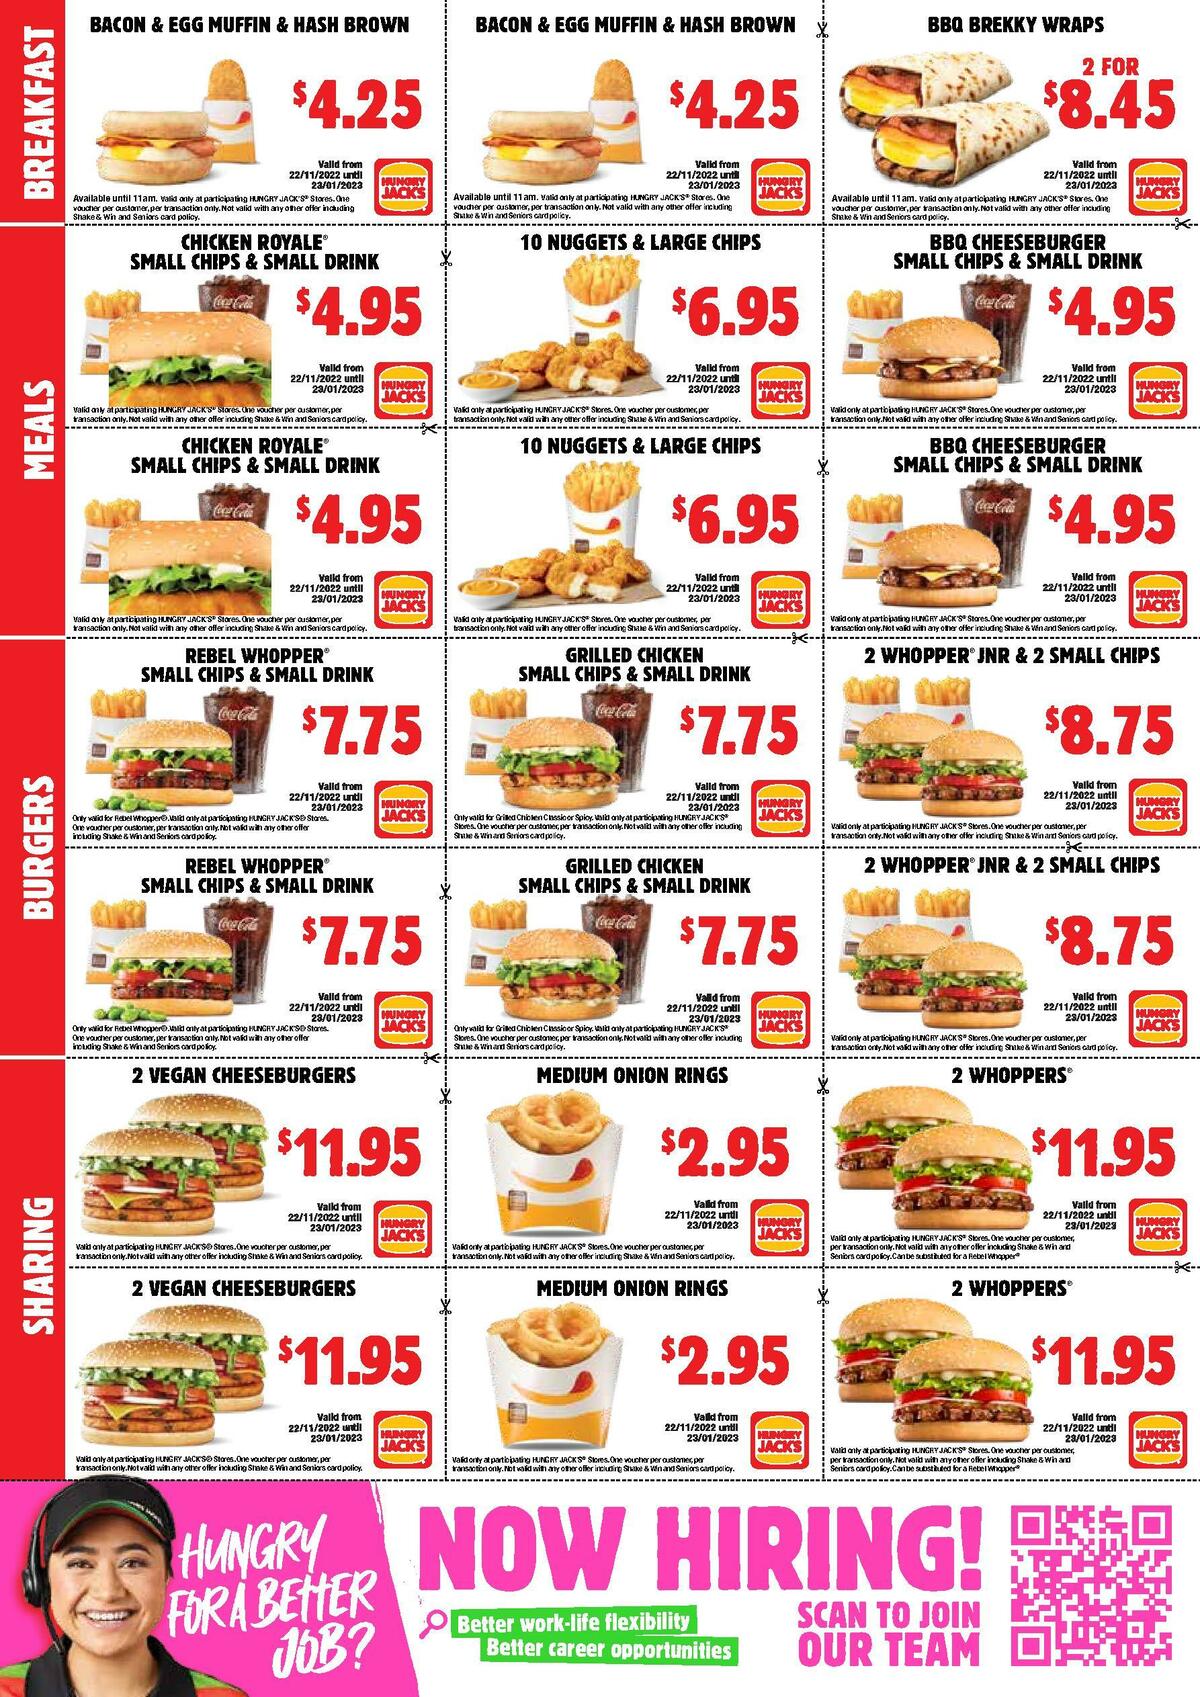 Hungry Jack's Catalogues from 22 November